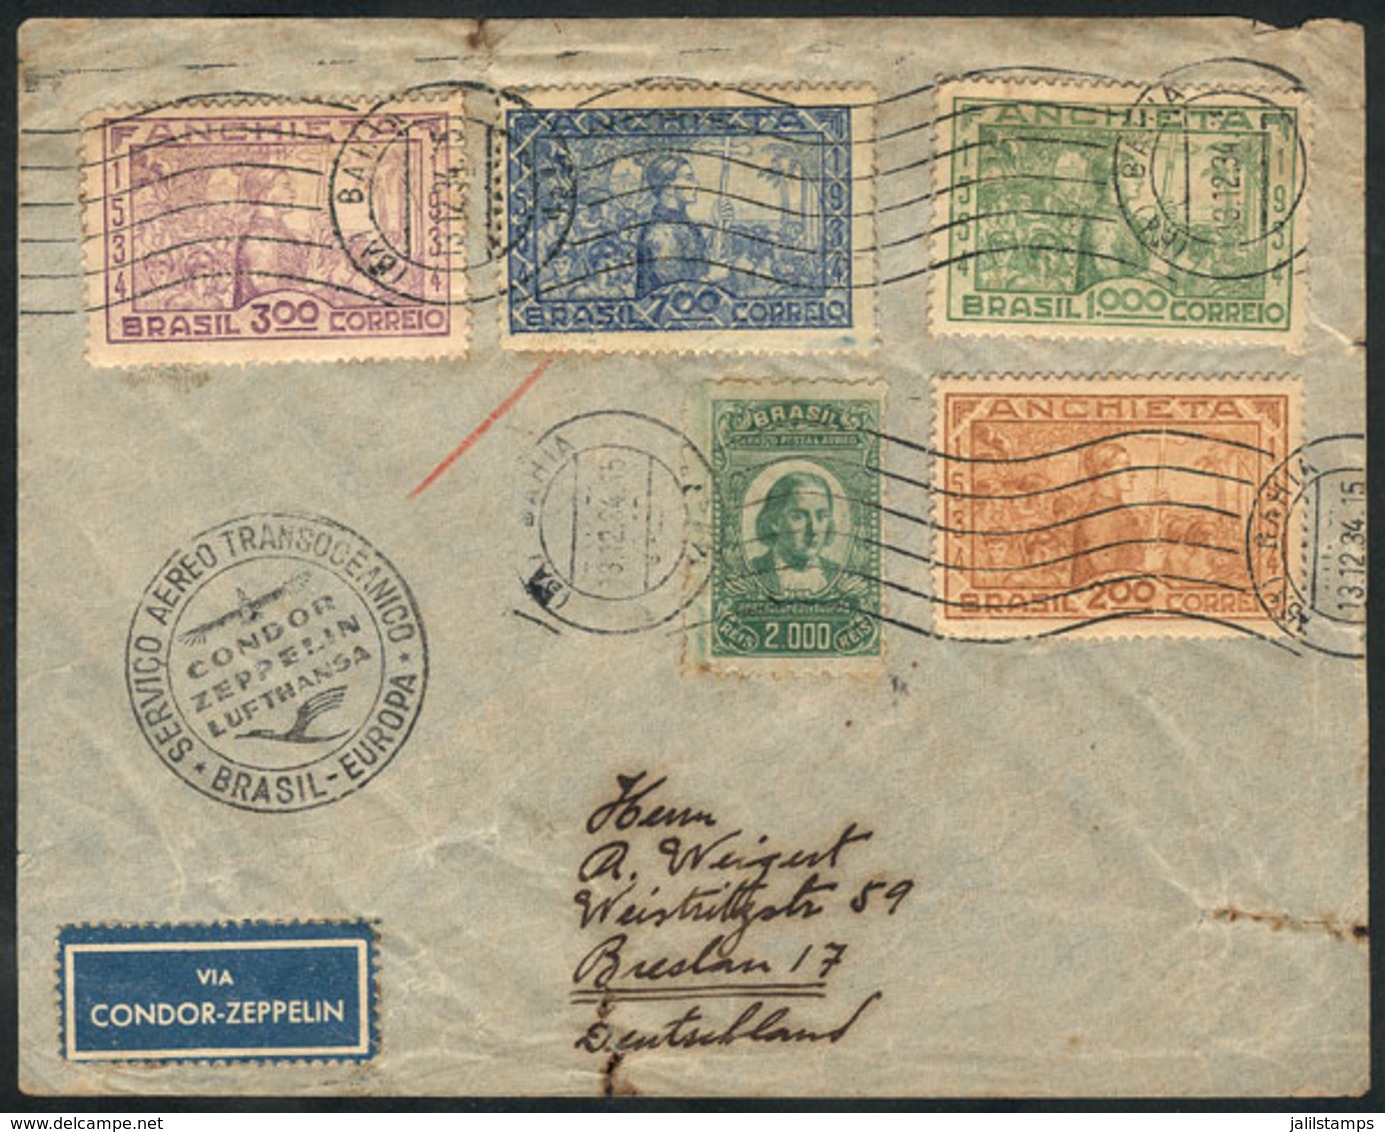 BRAZIL: Cover Franked By RHM. C-74/77 (Anchieta) + Another Value (total Postage 4,200Rs.) Sent From Bahia To Germany On  - Prephilately